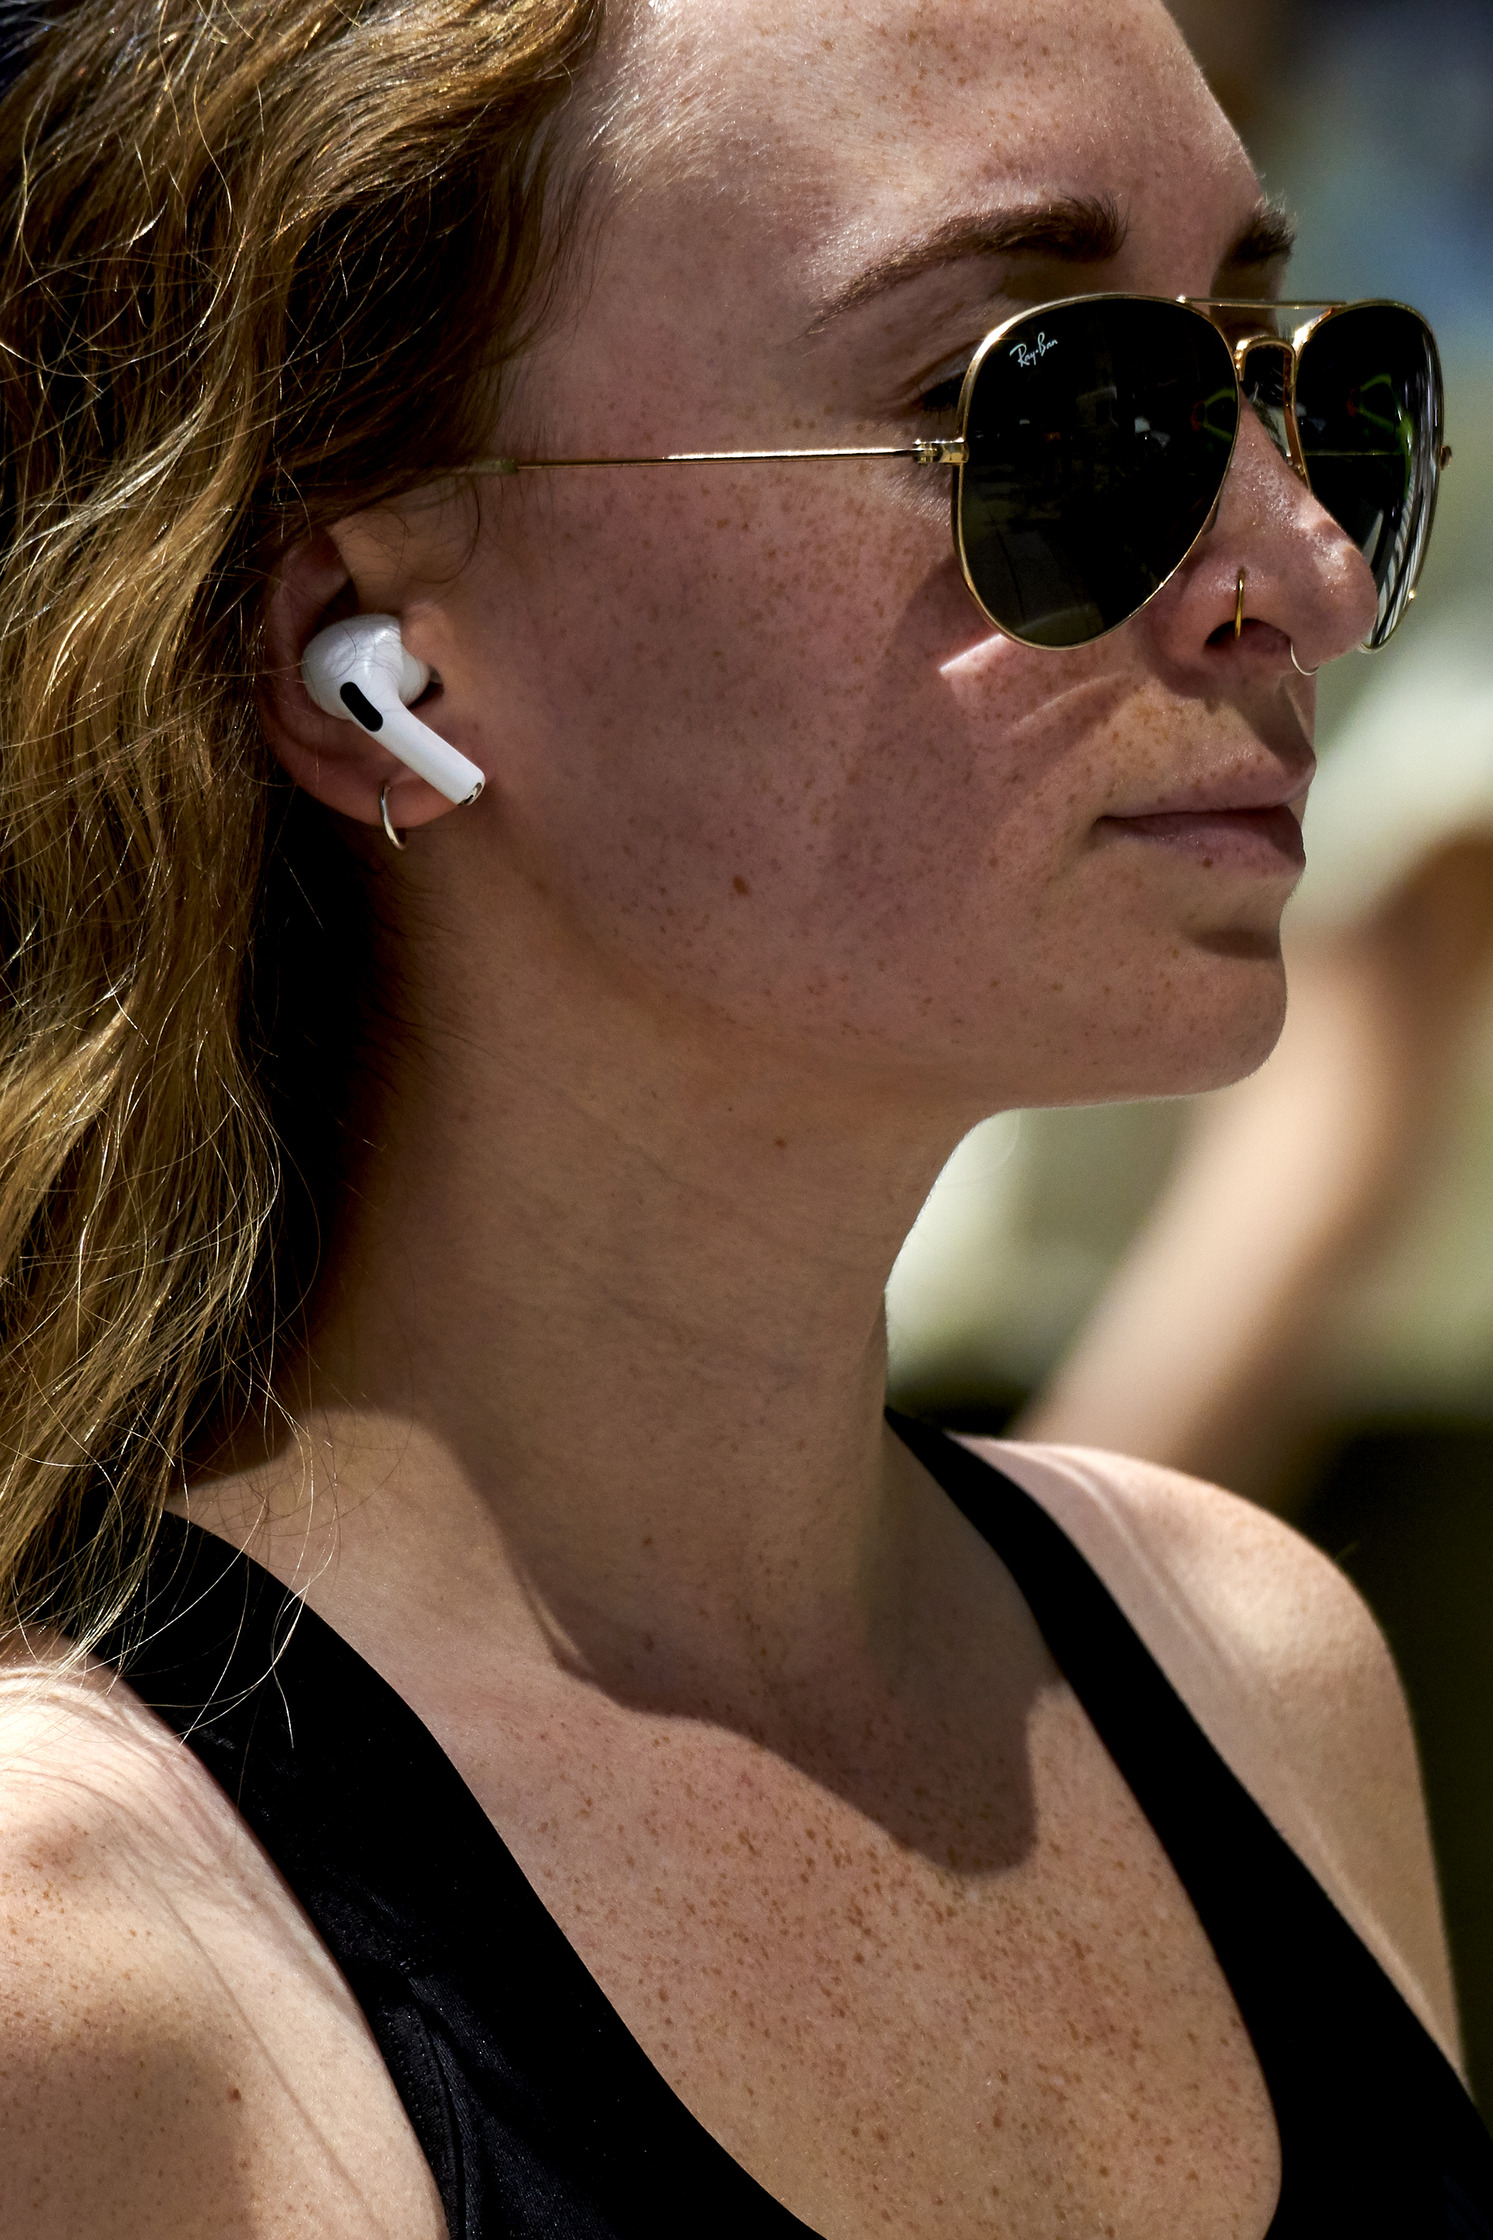 a woman wearing sunglasses and airpods